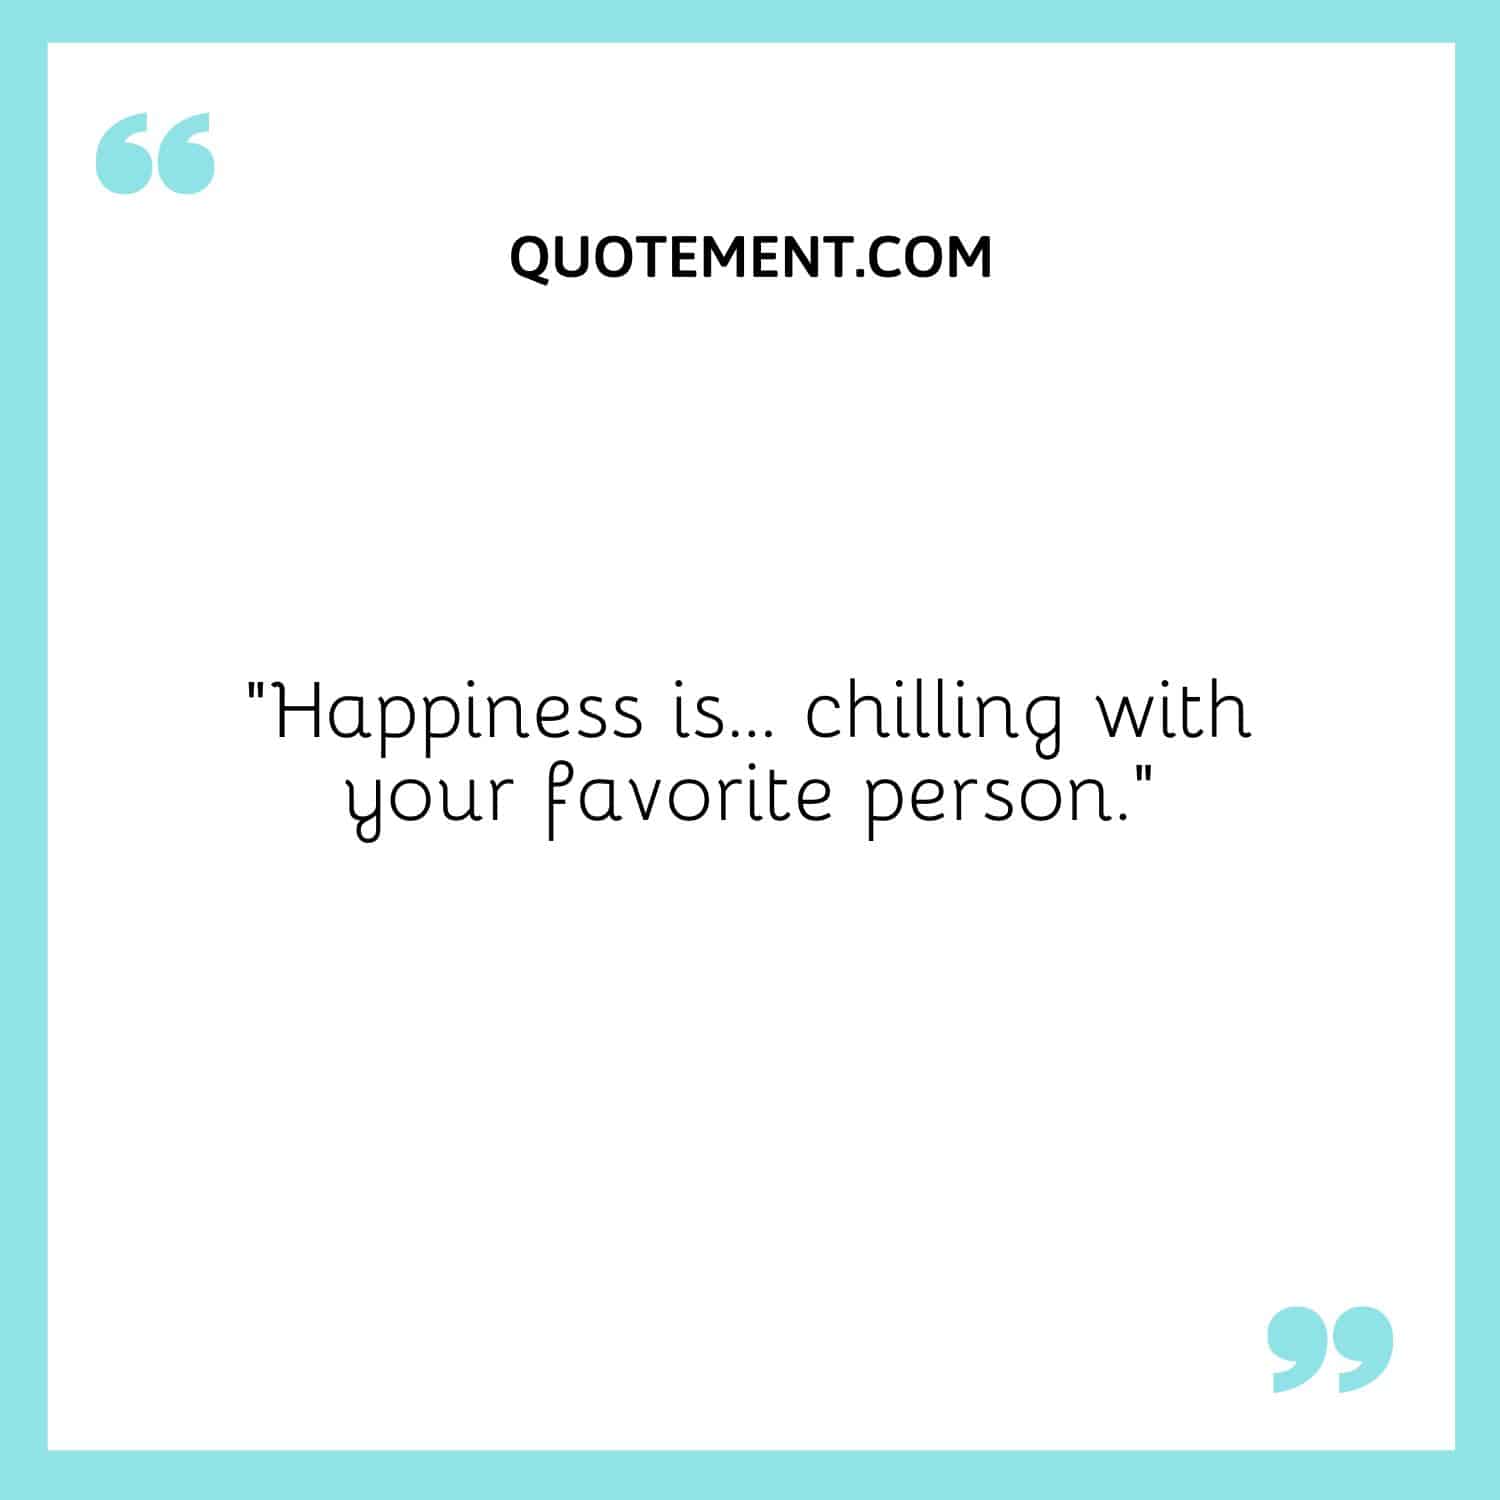 Happiness is… chilling with your favorite person